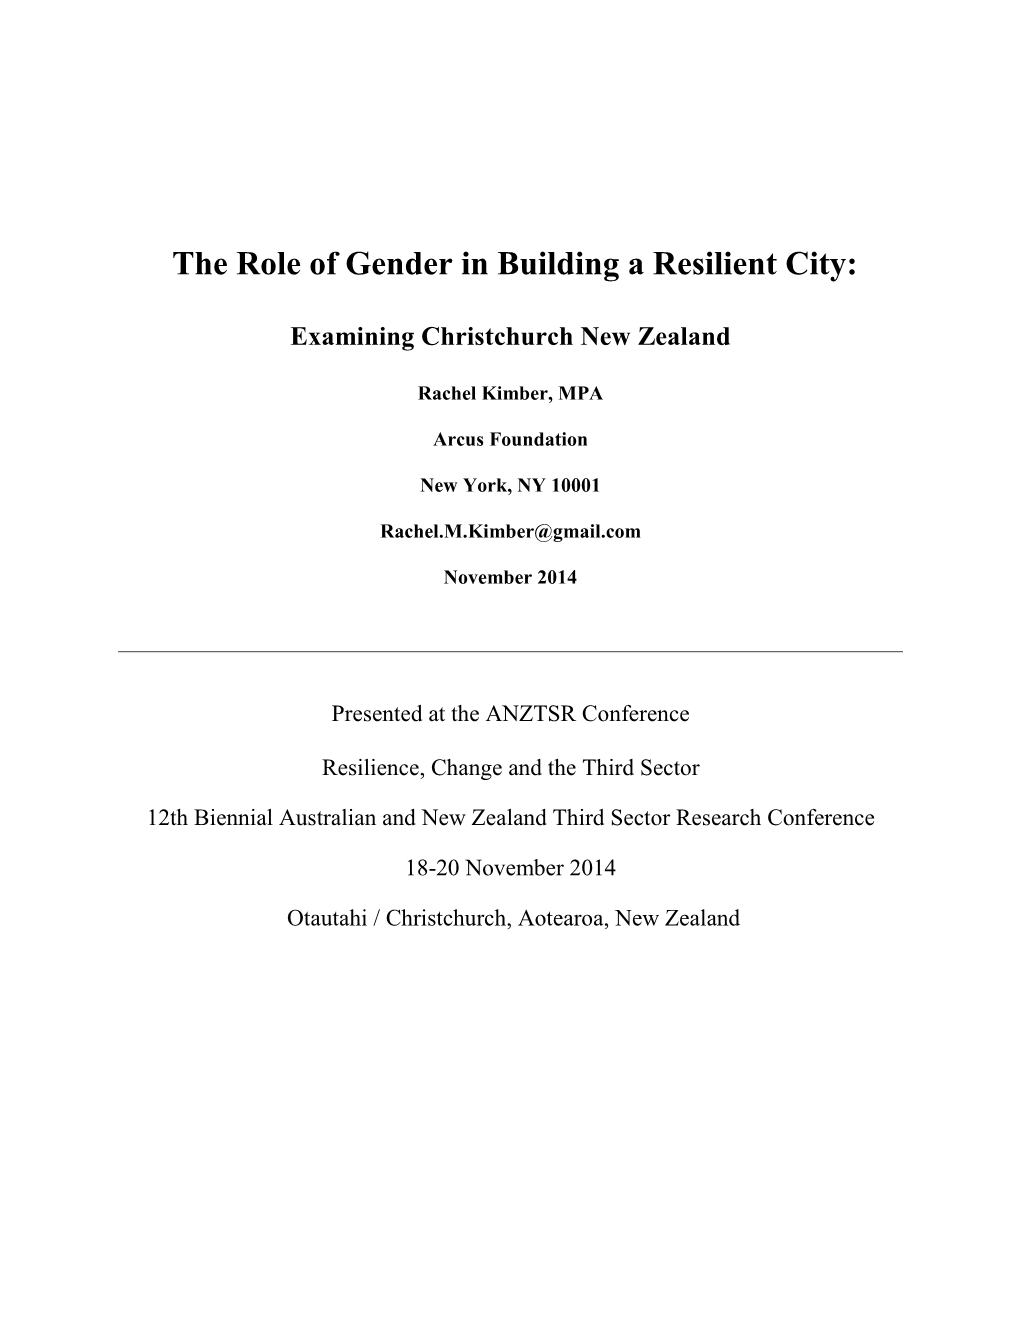 The Role of Gender in Building a Resilient City